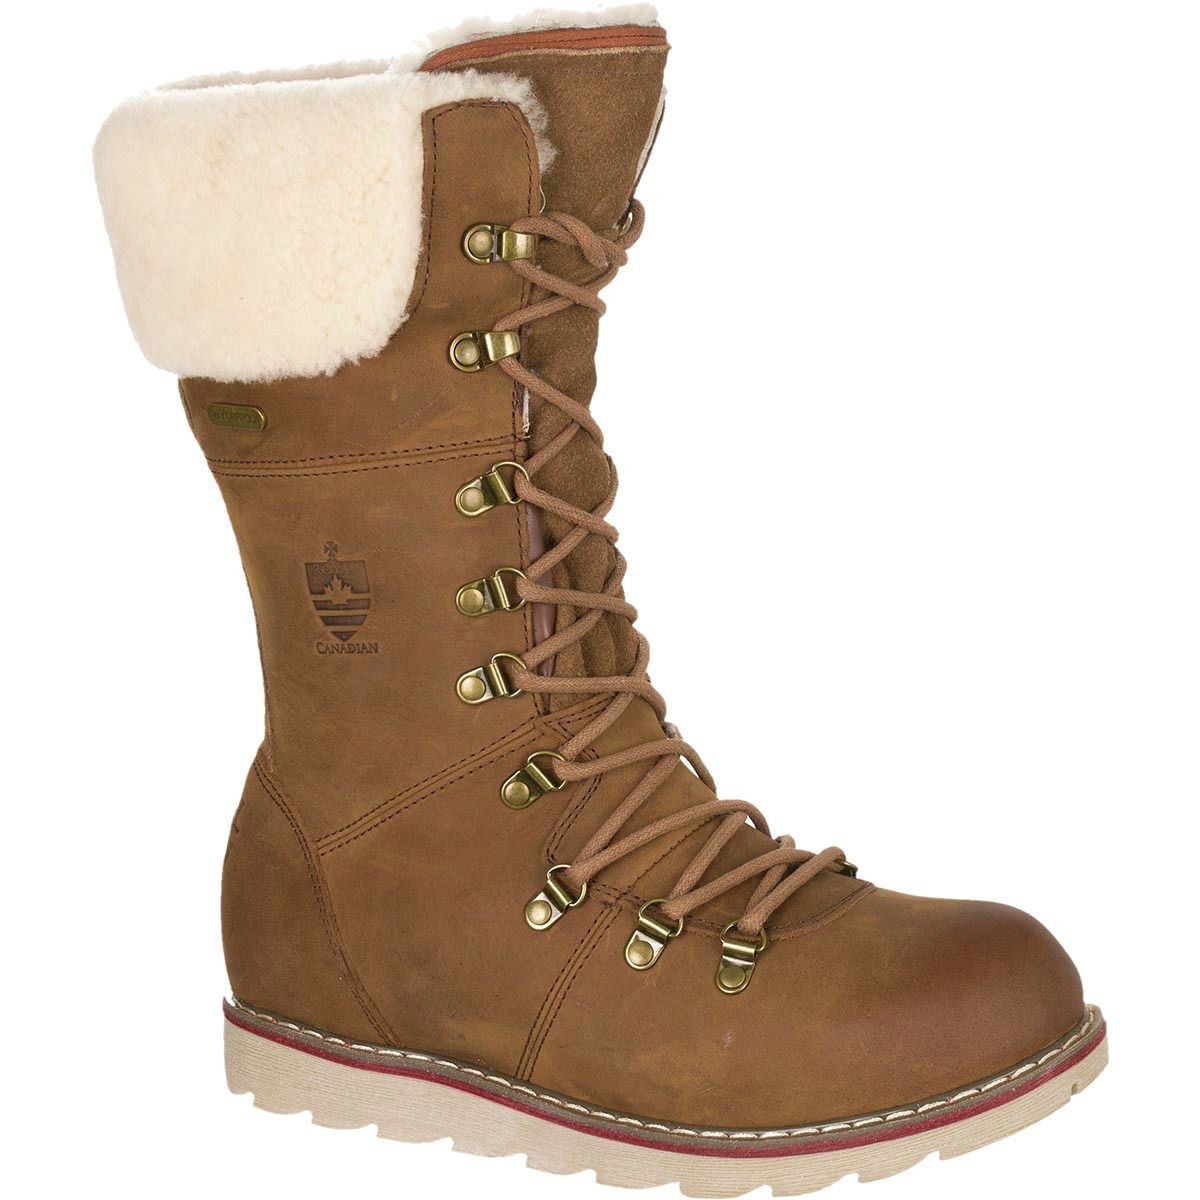 Royal Canadian Louise Boot - Women's | Backcountry.com